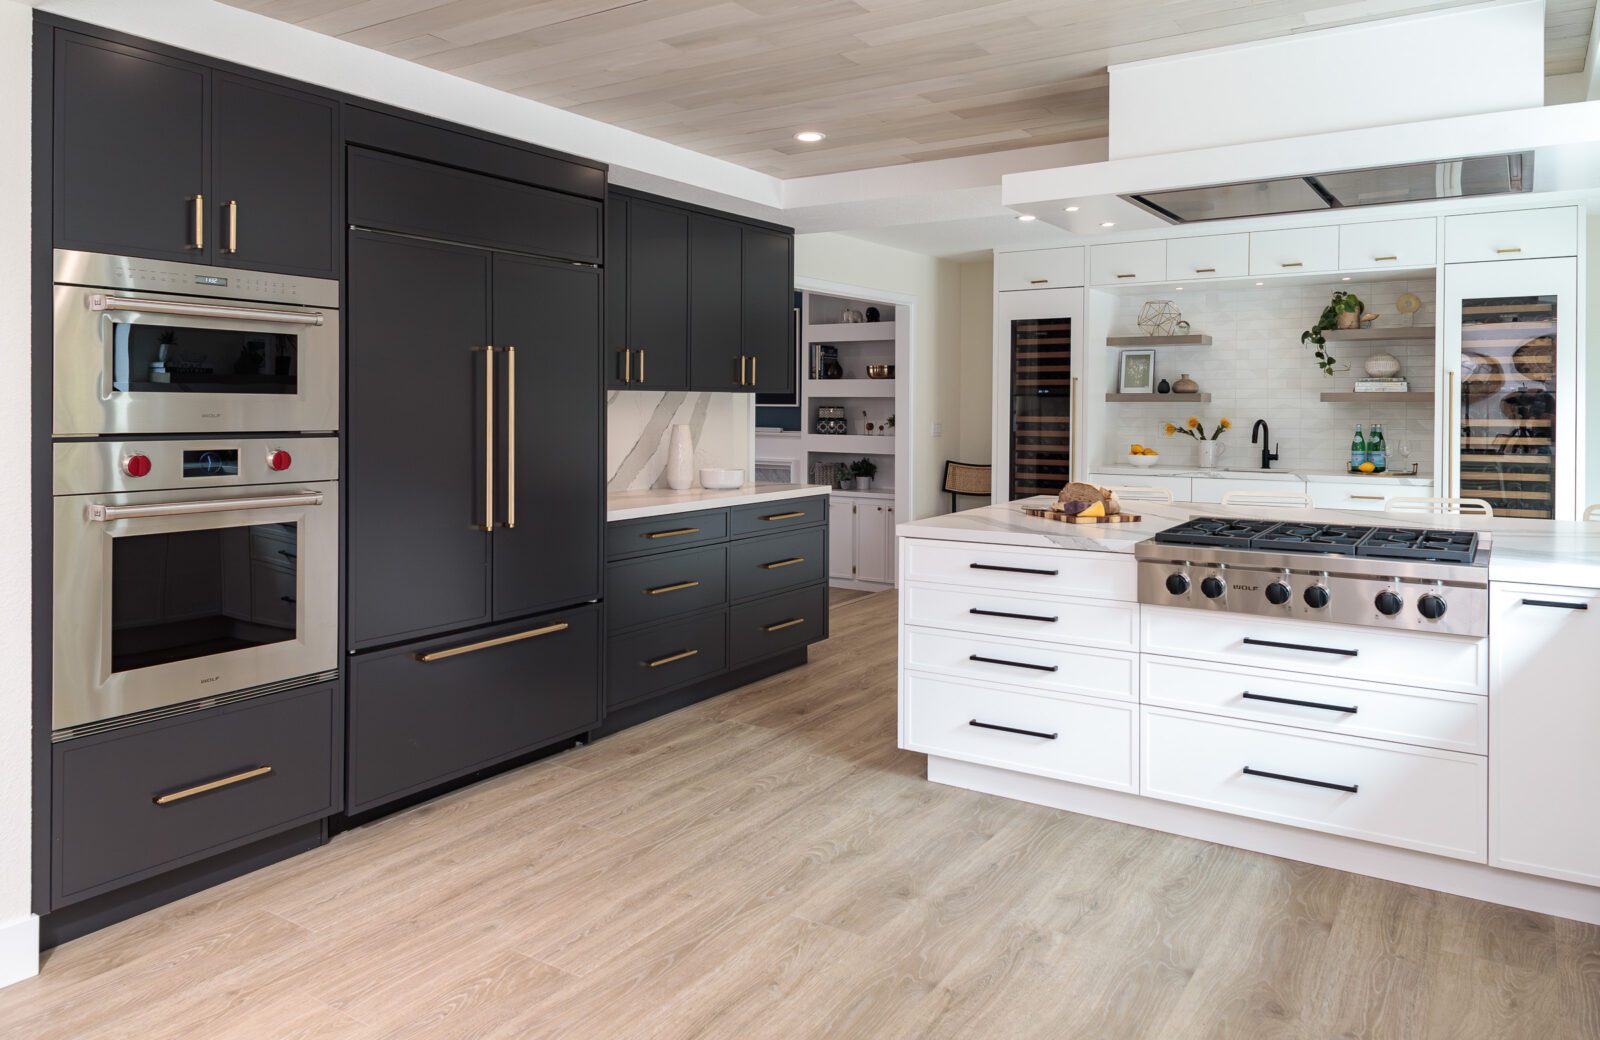 Large kitchen with Charcoal and white cabinets, paneled Sub Zero fridge and freezer, ceiling mounted hood, light LVP floors; two toned cabinets